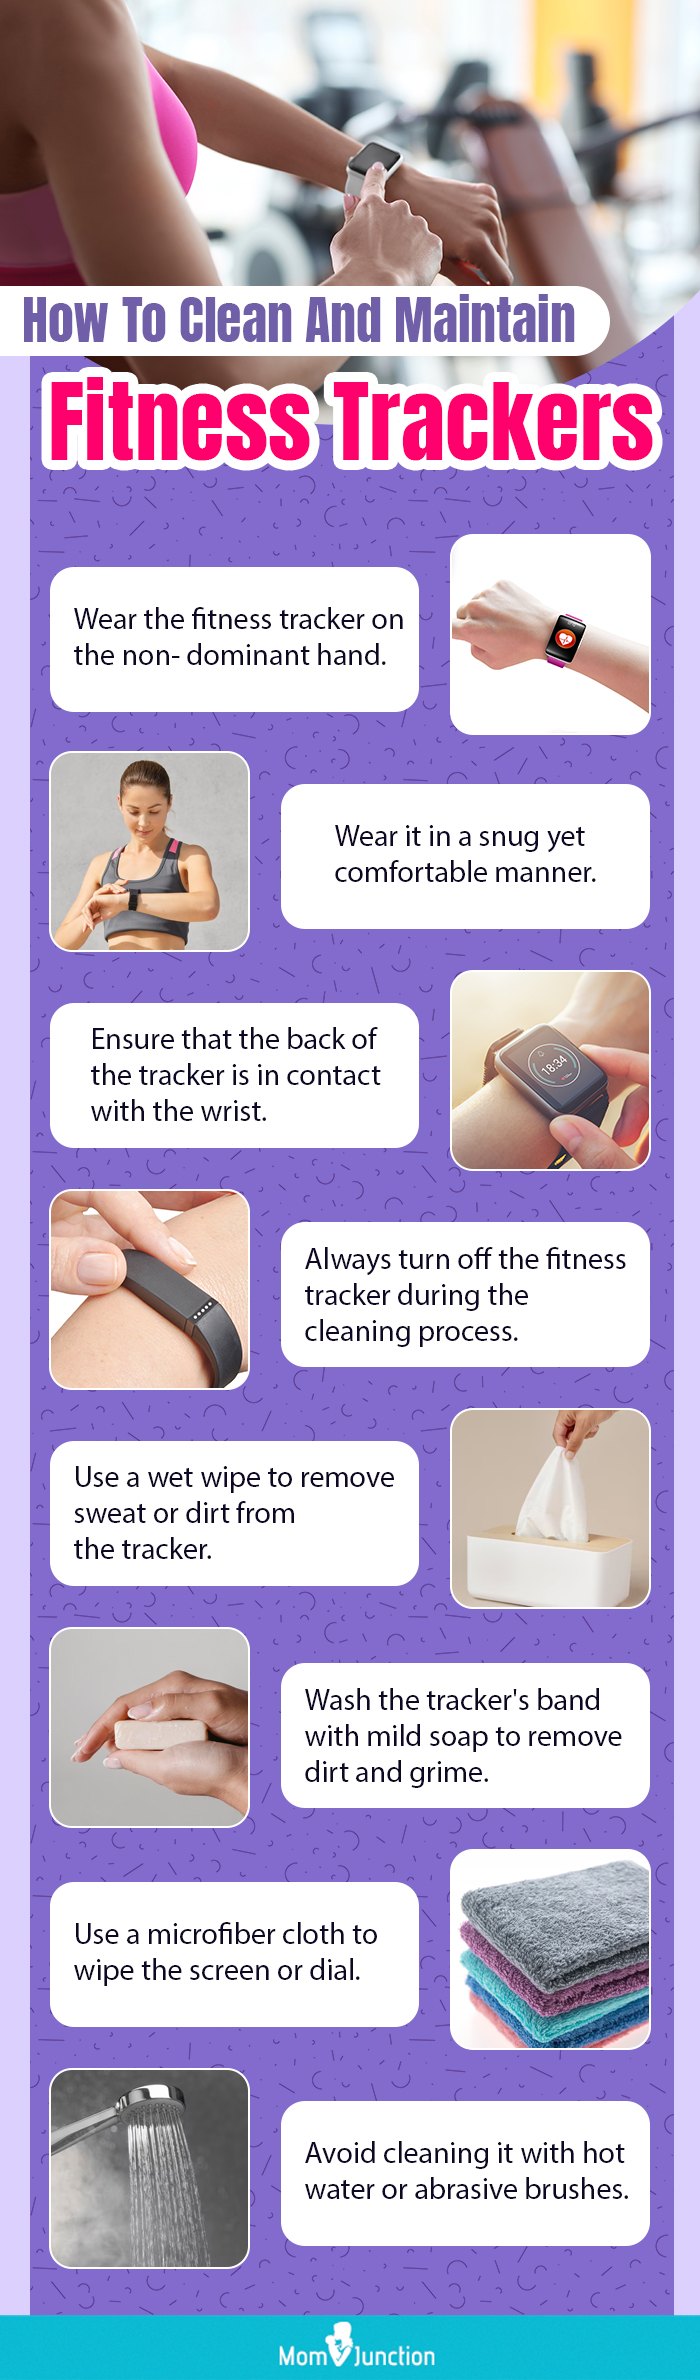 Tips To Wear And Maintain Fitness Trackers (infographic)